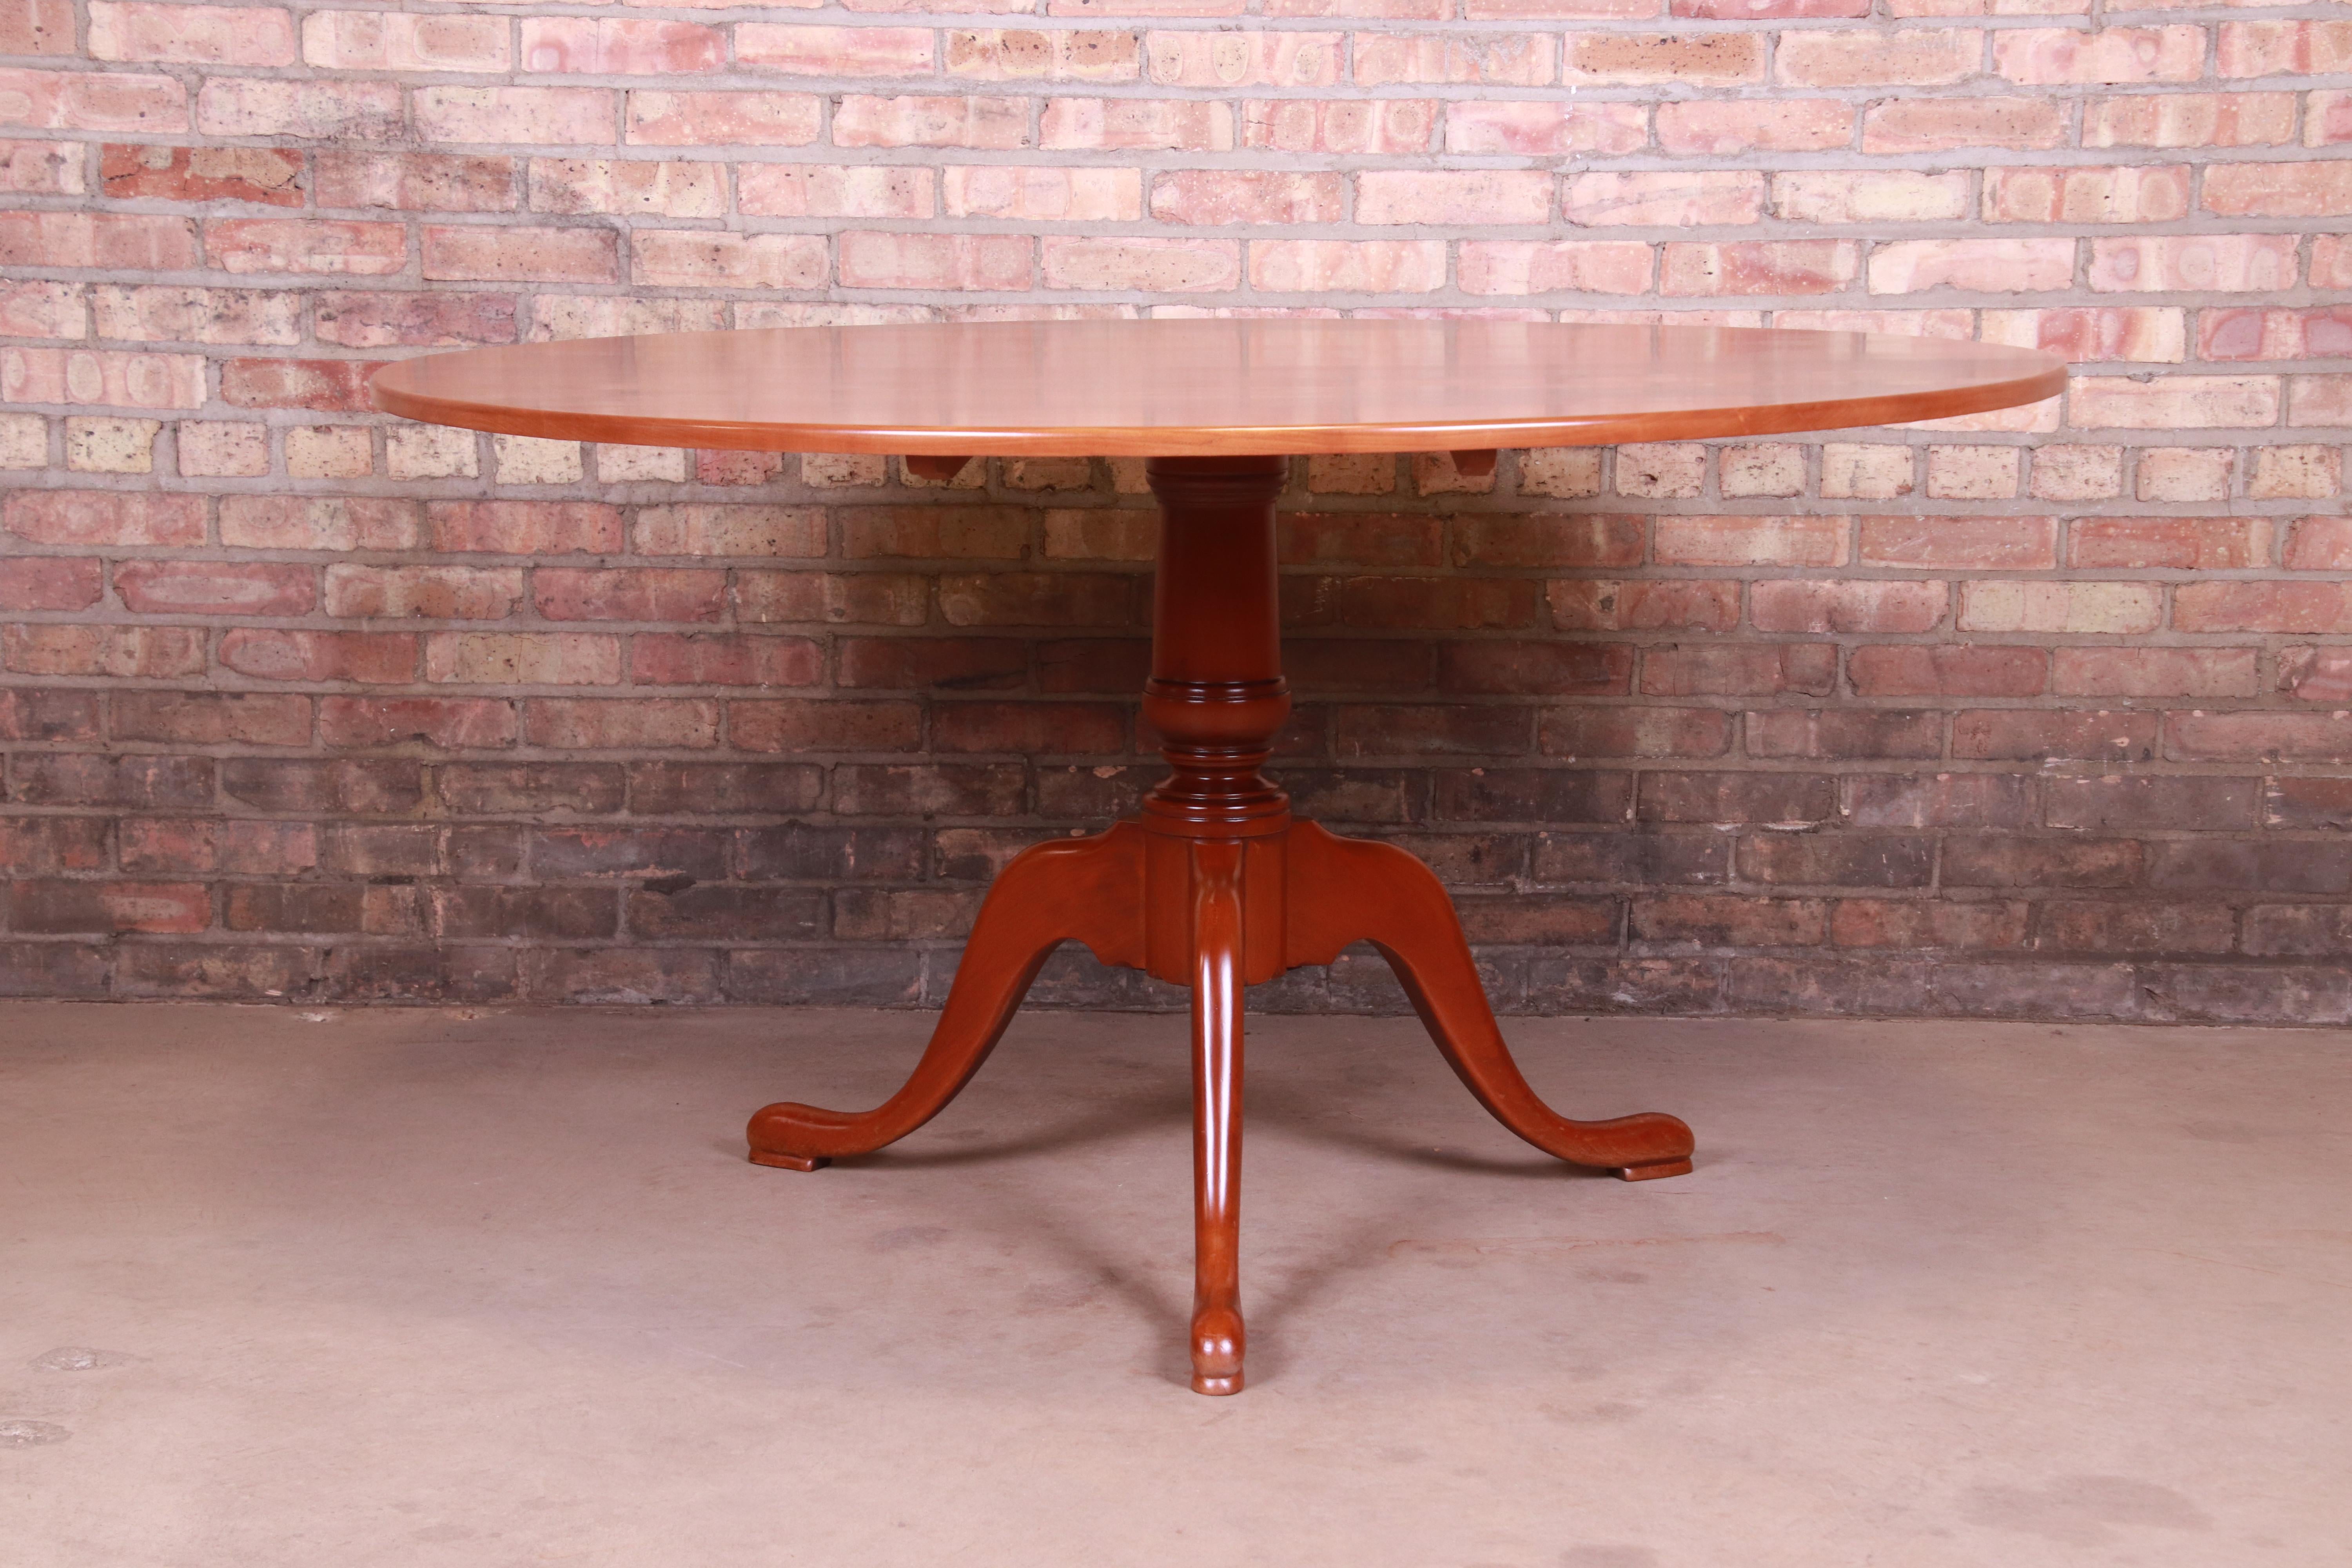 An exceptional Queen Anne style cherry wood tilt top pedestal breakfast table or dining table

By Eldred Wheeler

USA, late 20th century

Measures: 54